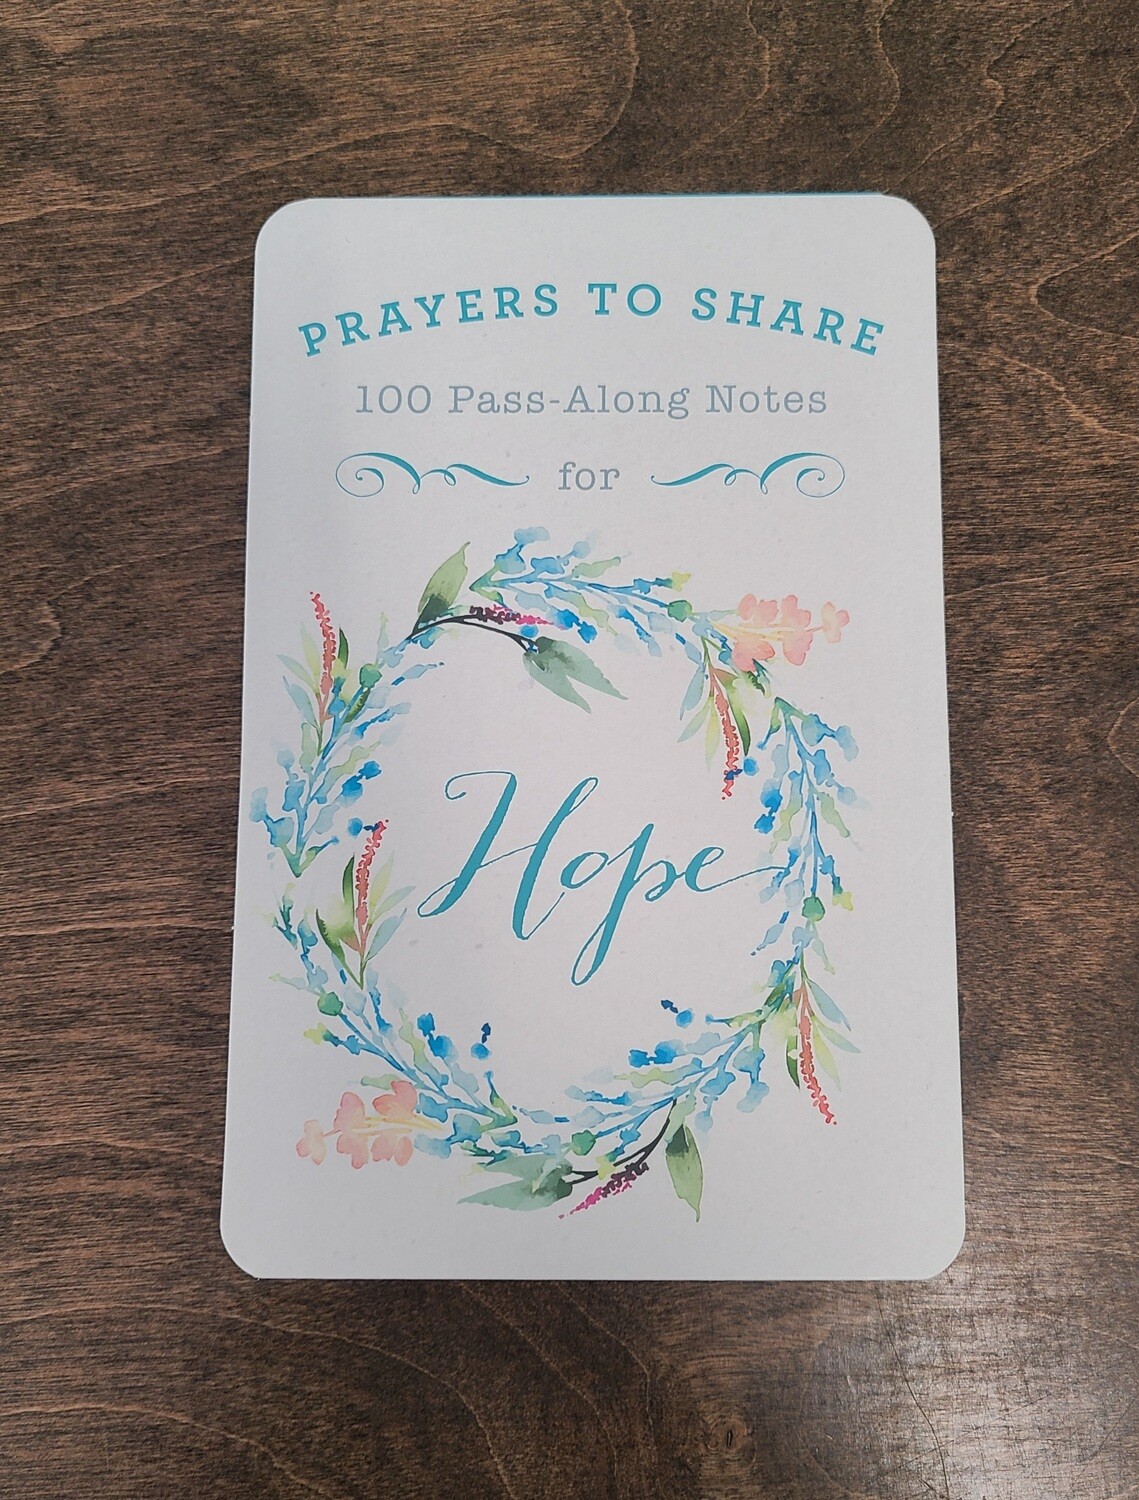 100 Pass-Along Prayer Notes to Share for Hope